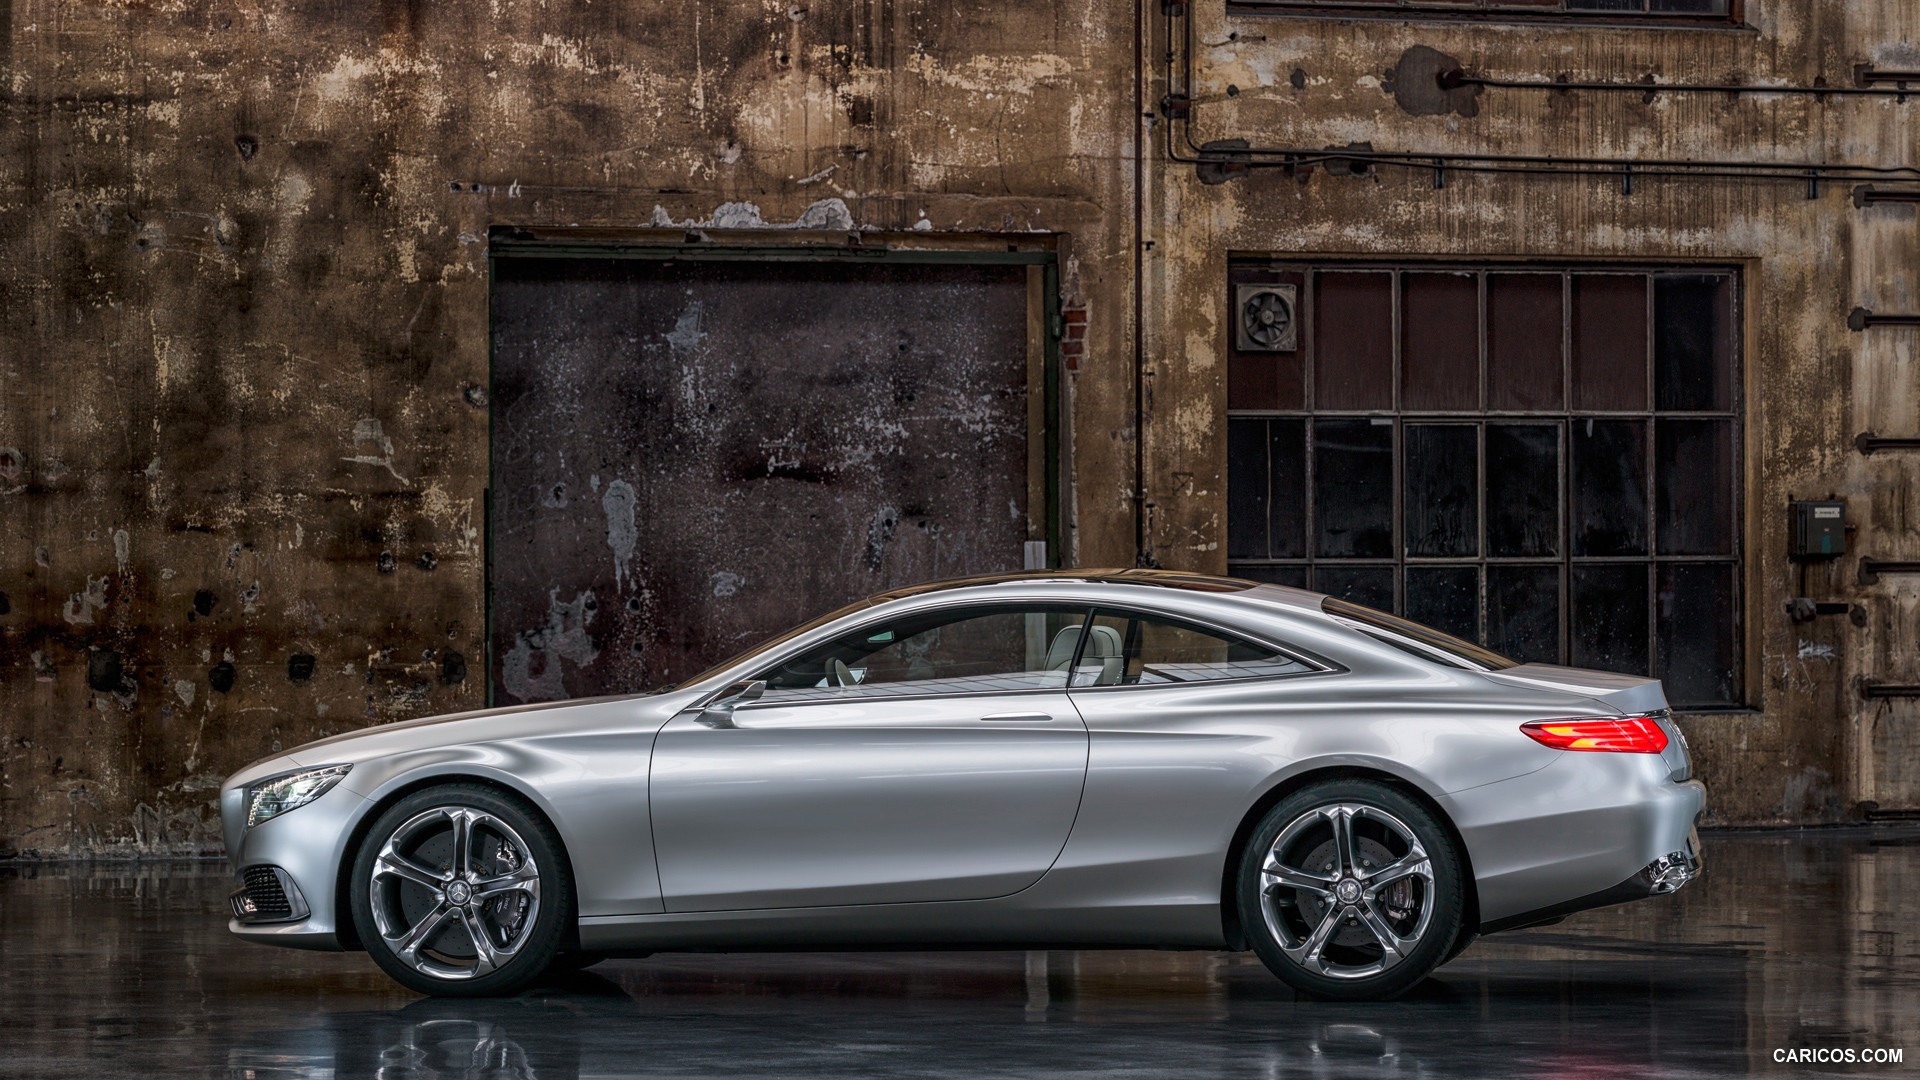 Mercedes-Benz S-Class Coupe Concept (2013)  - Side, #15 of 58